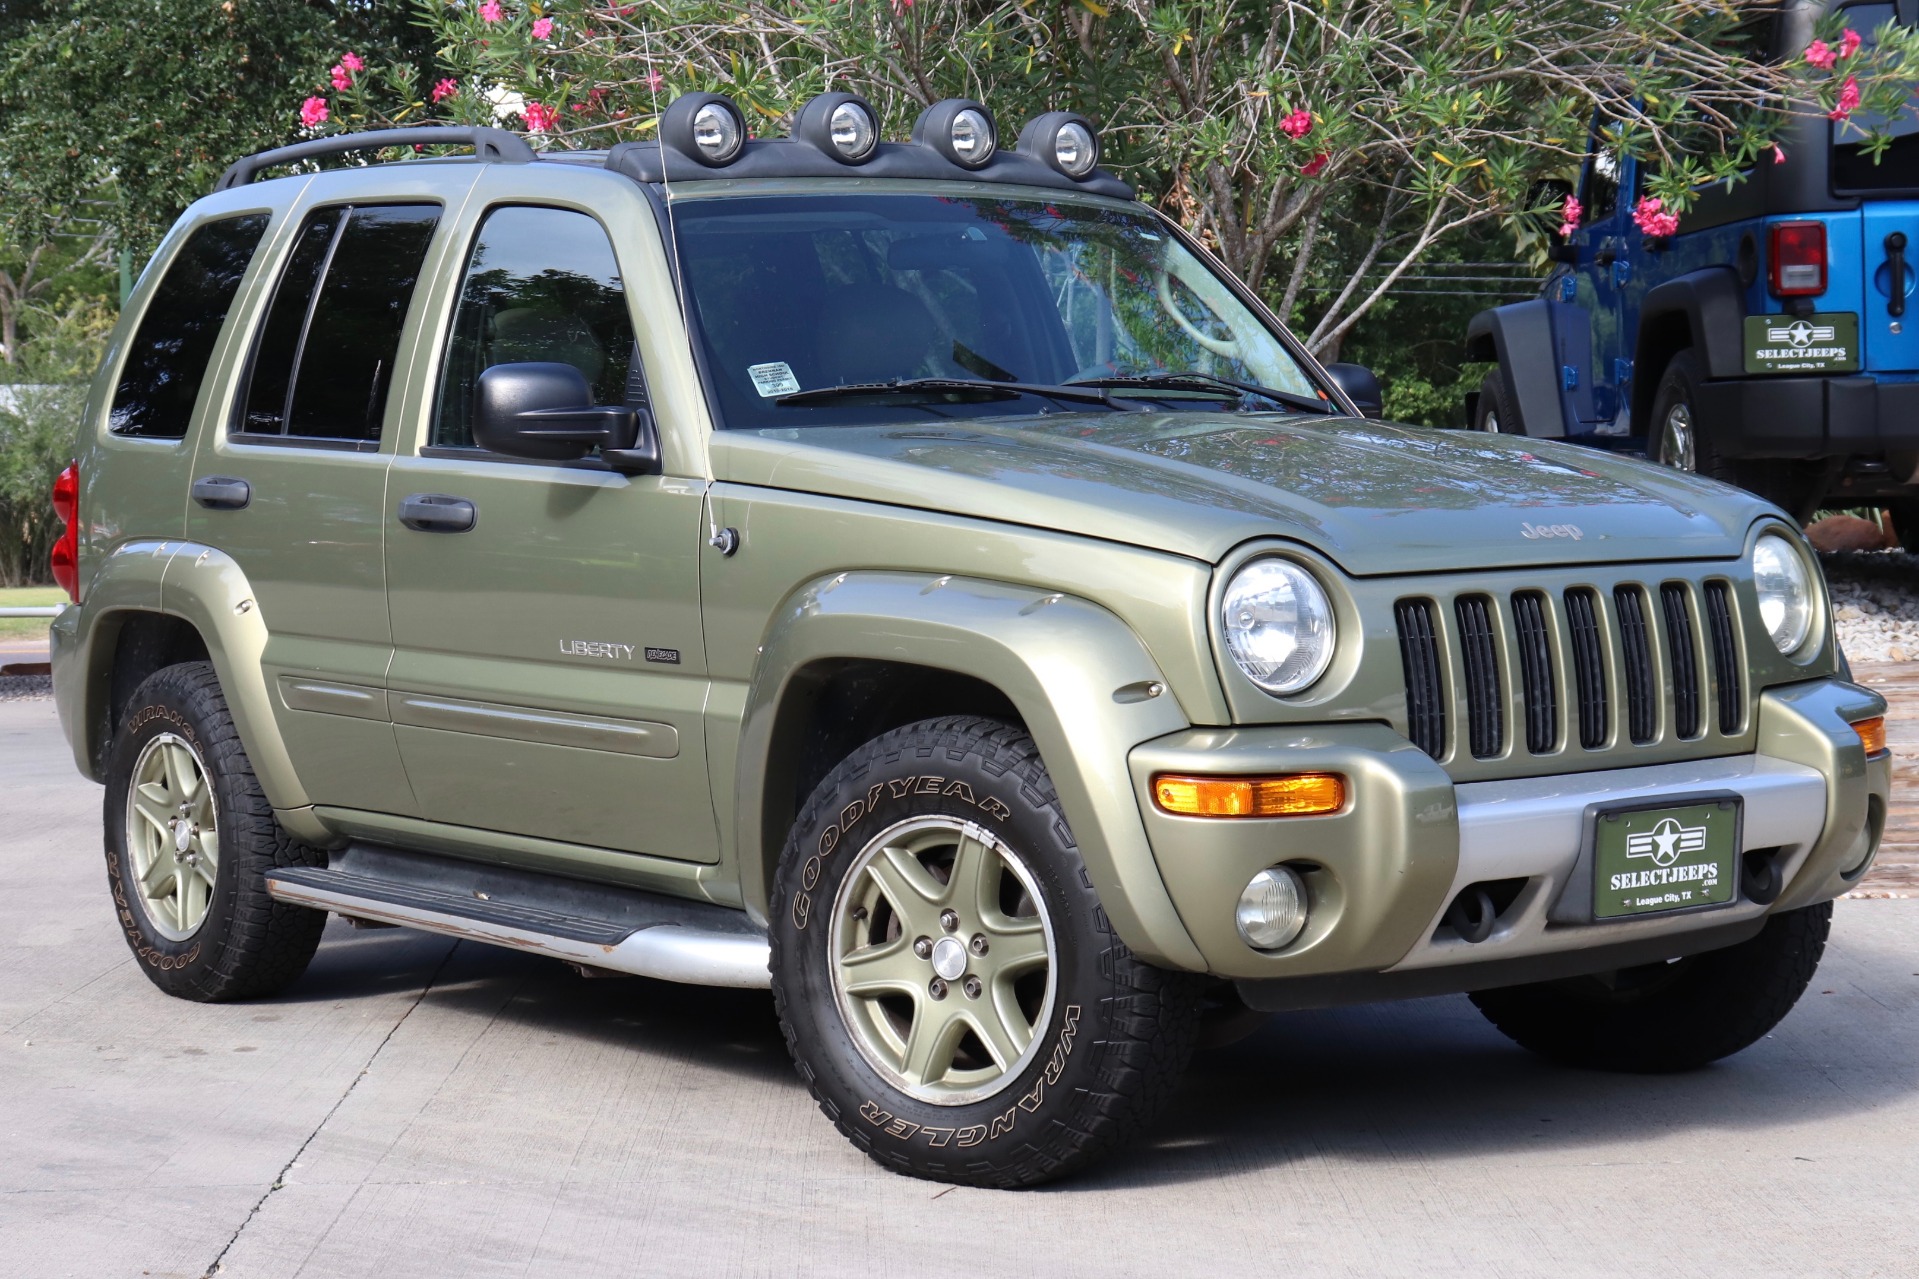 Used 2003 Jeep Liberty 4dr Renegade 4WD For Sale ($7,995) | Select Jeeps  Inc. Stock #548593